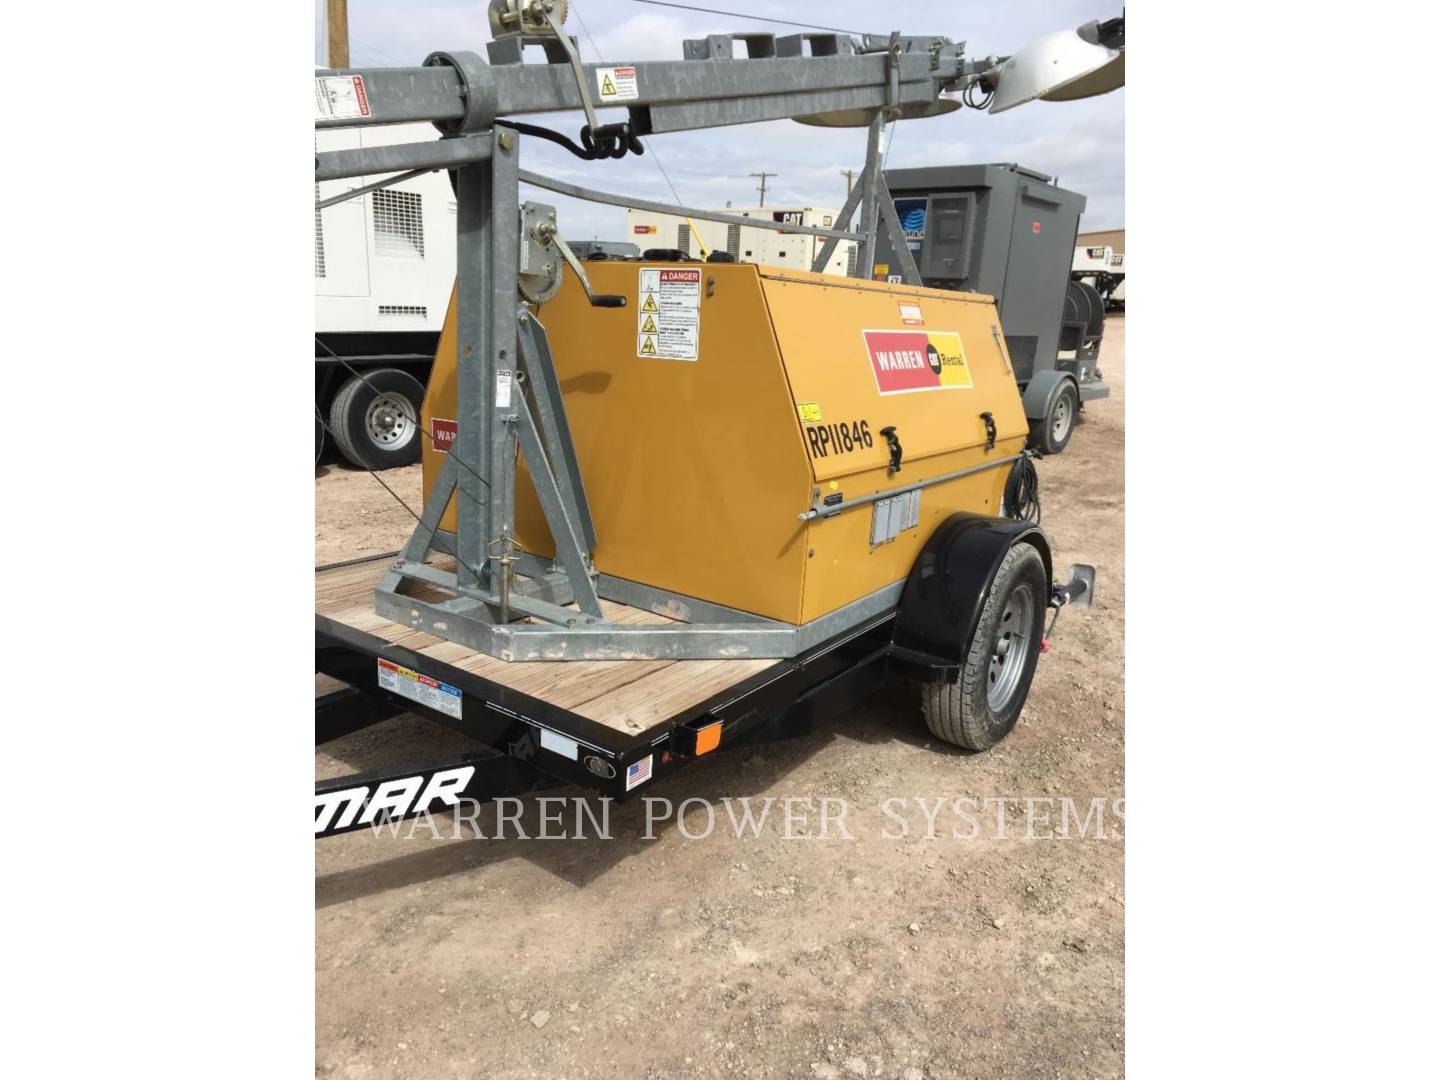 2012 Norac Ltn8wlnotm Light Tower For Sale In Amarillo Tx Ironsearch